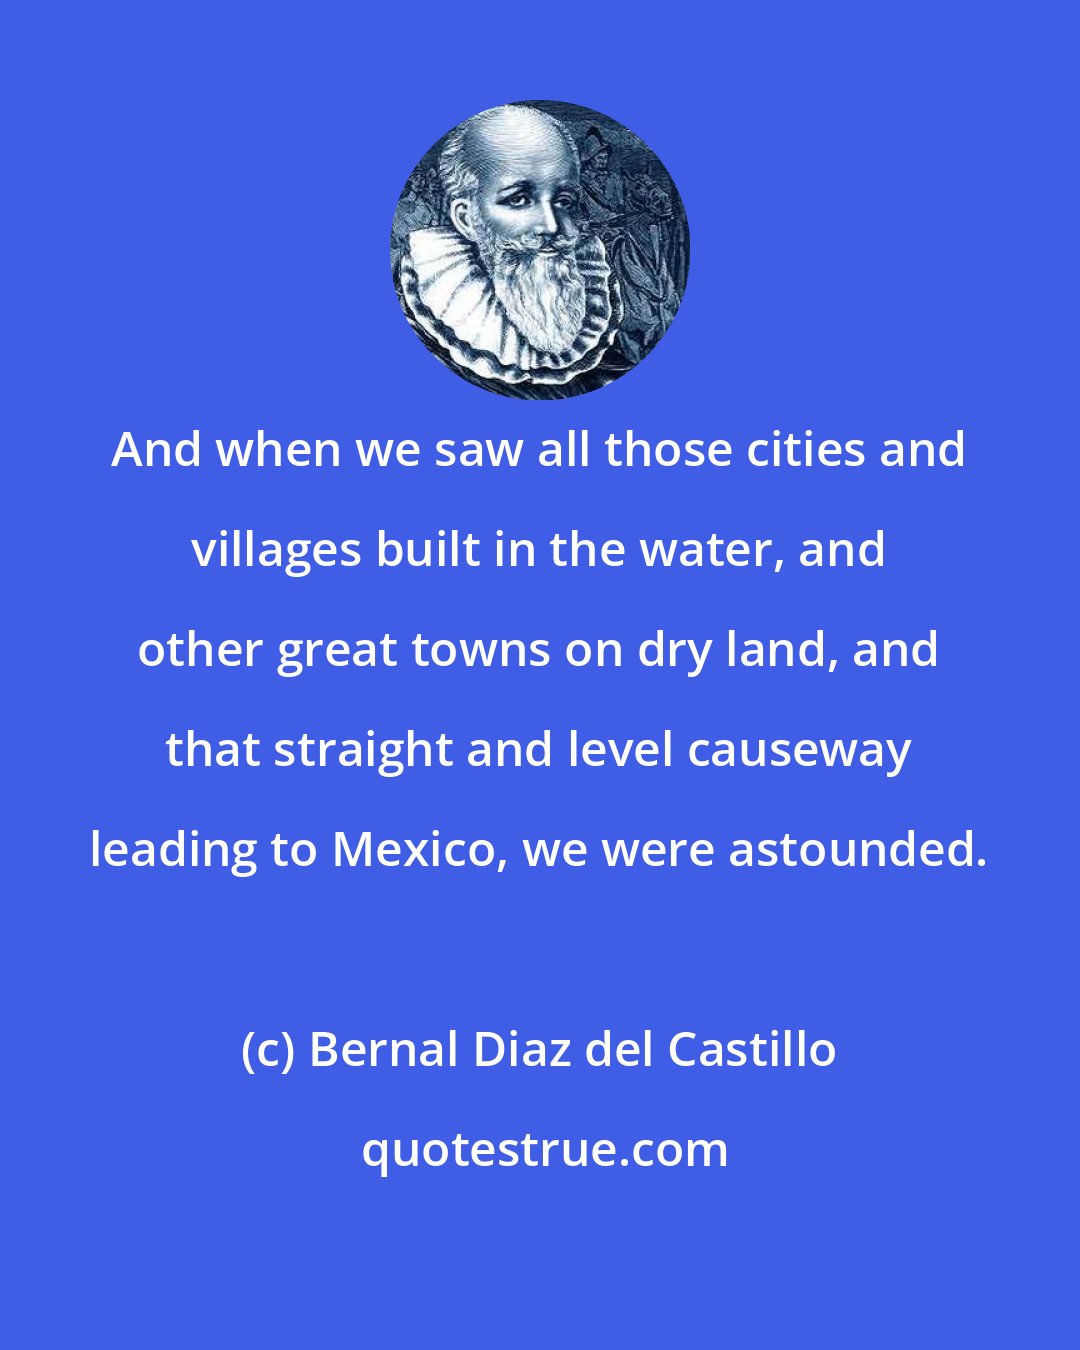 Bernal Diaz del Castillo: And when we saw all those cities and villages built in the water, and other great towns on dry land, and that straight and level causeway leading to Mexico, we were astounded.